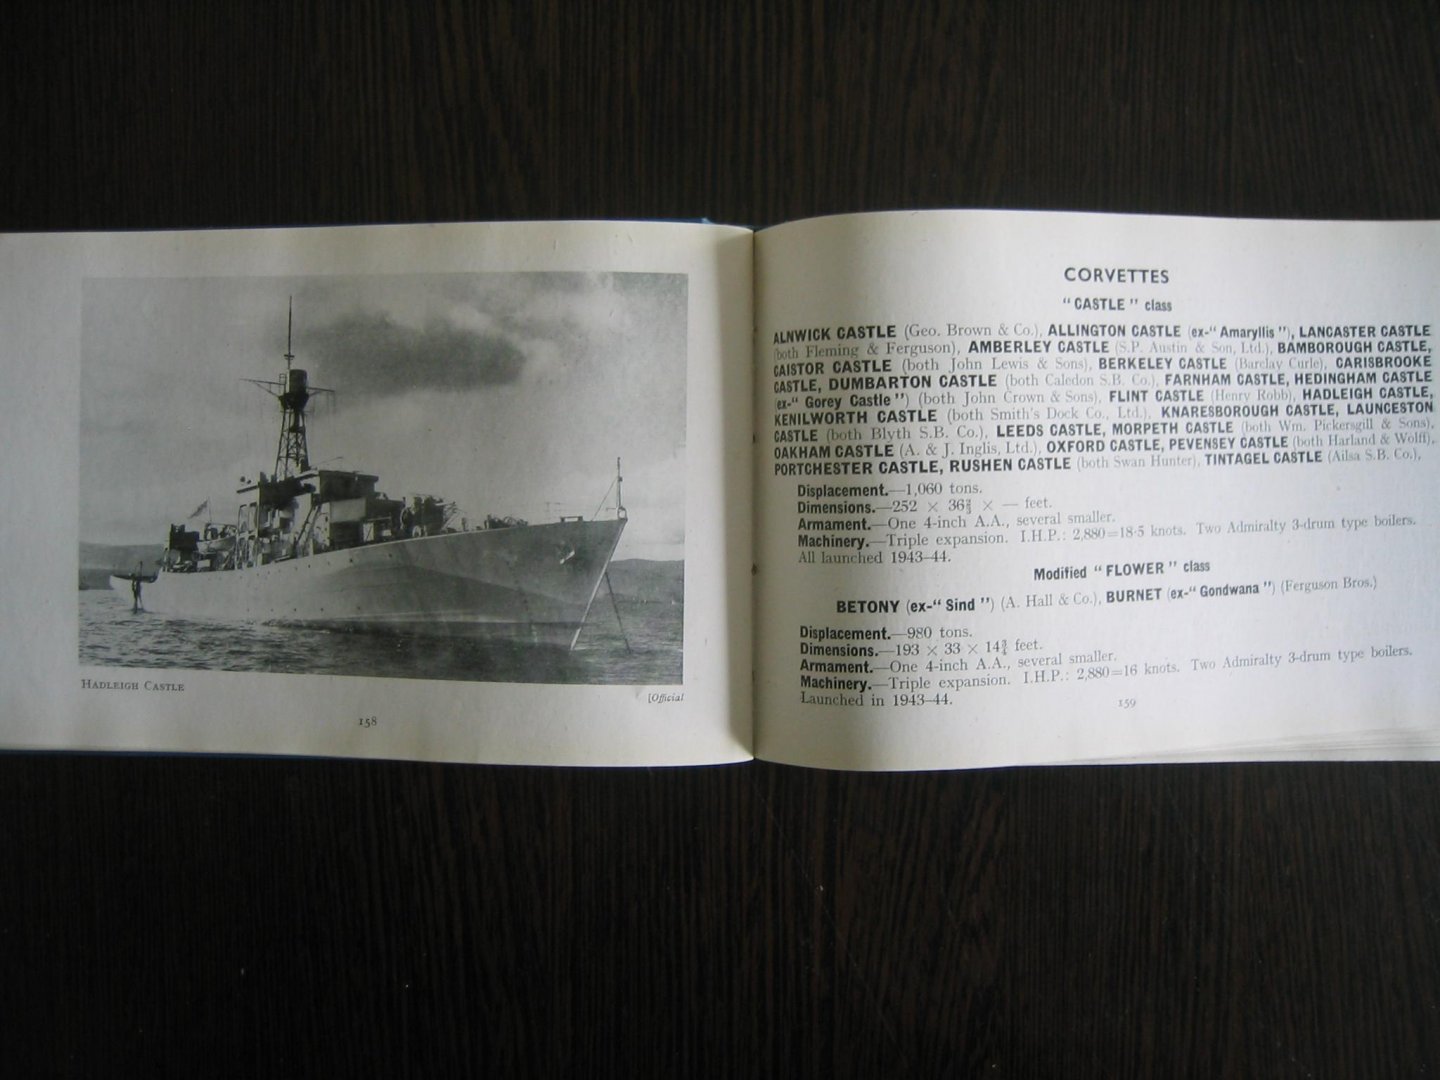 McMurtrie, Francis E. - Ships of the Royal Navy